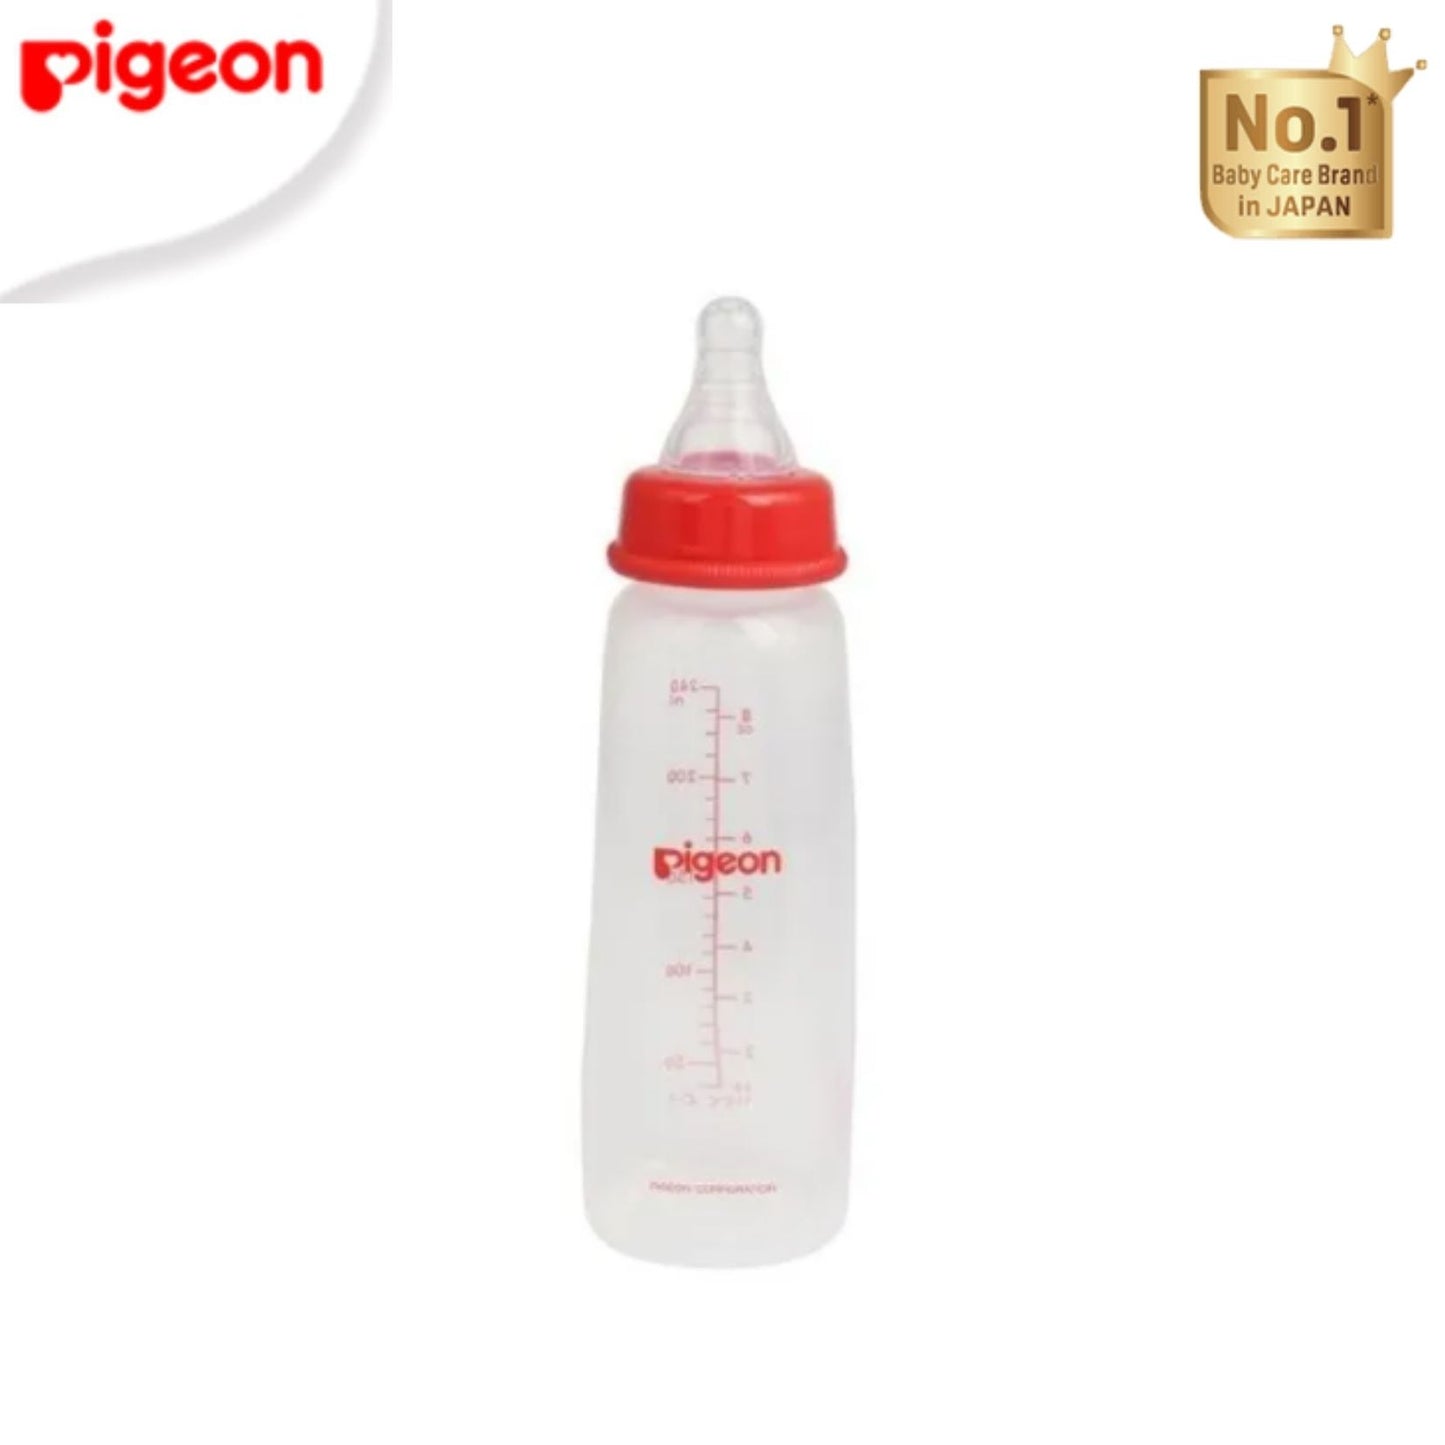 Pigeon Official - RPP Slimneck/Standard Feeding Red Bottle Fast Flow, 240ml (L) (Twinpack), PP Material